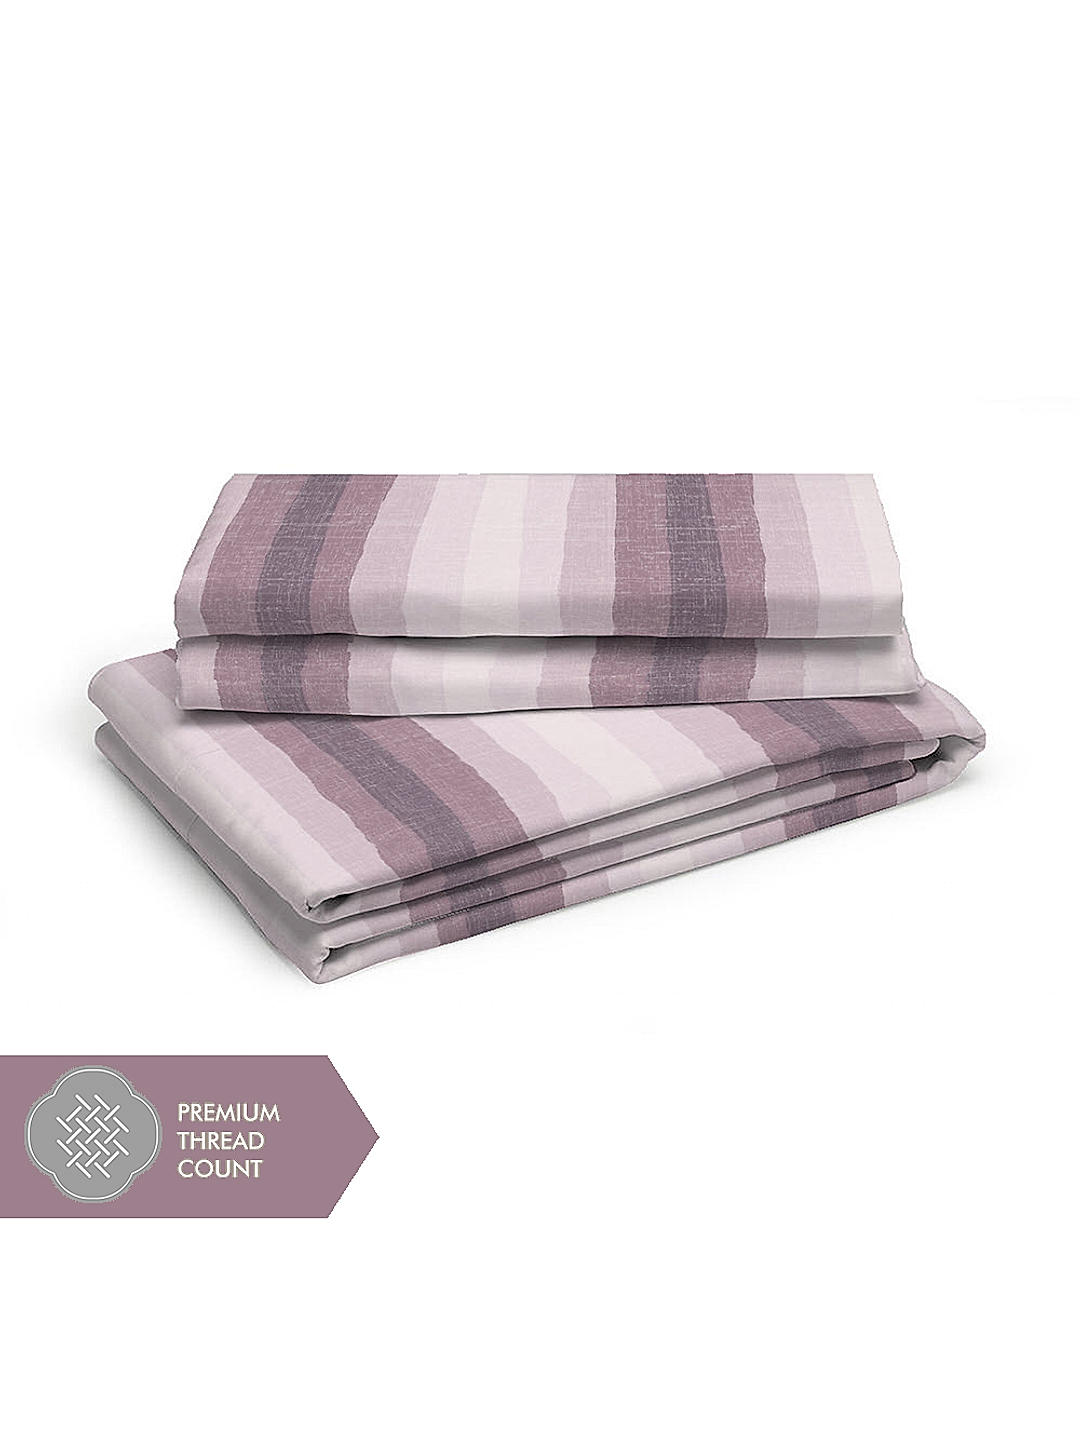 Geo Tangle 212 TC 100% cotton Super Fine Purple Colored Ombre Dyed Print Double Bed Sheet Set